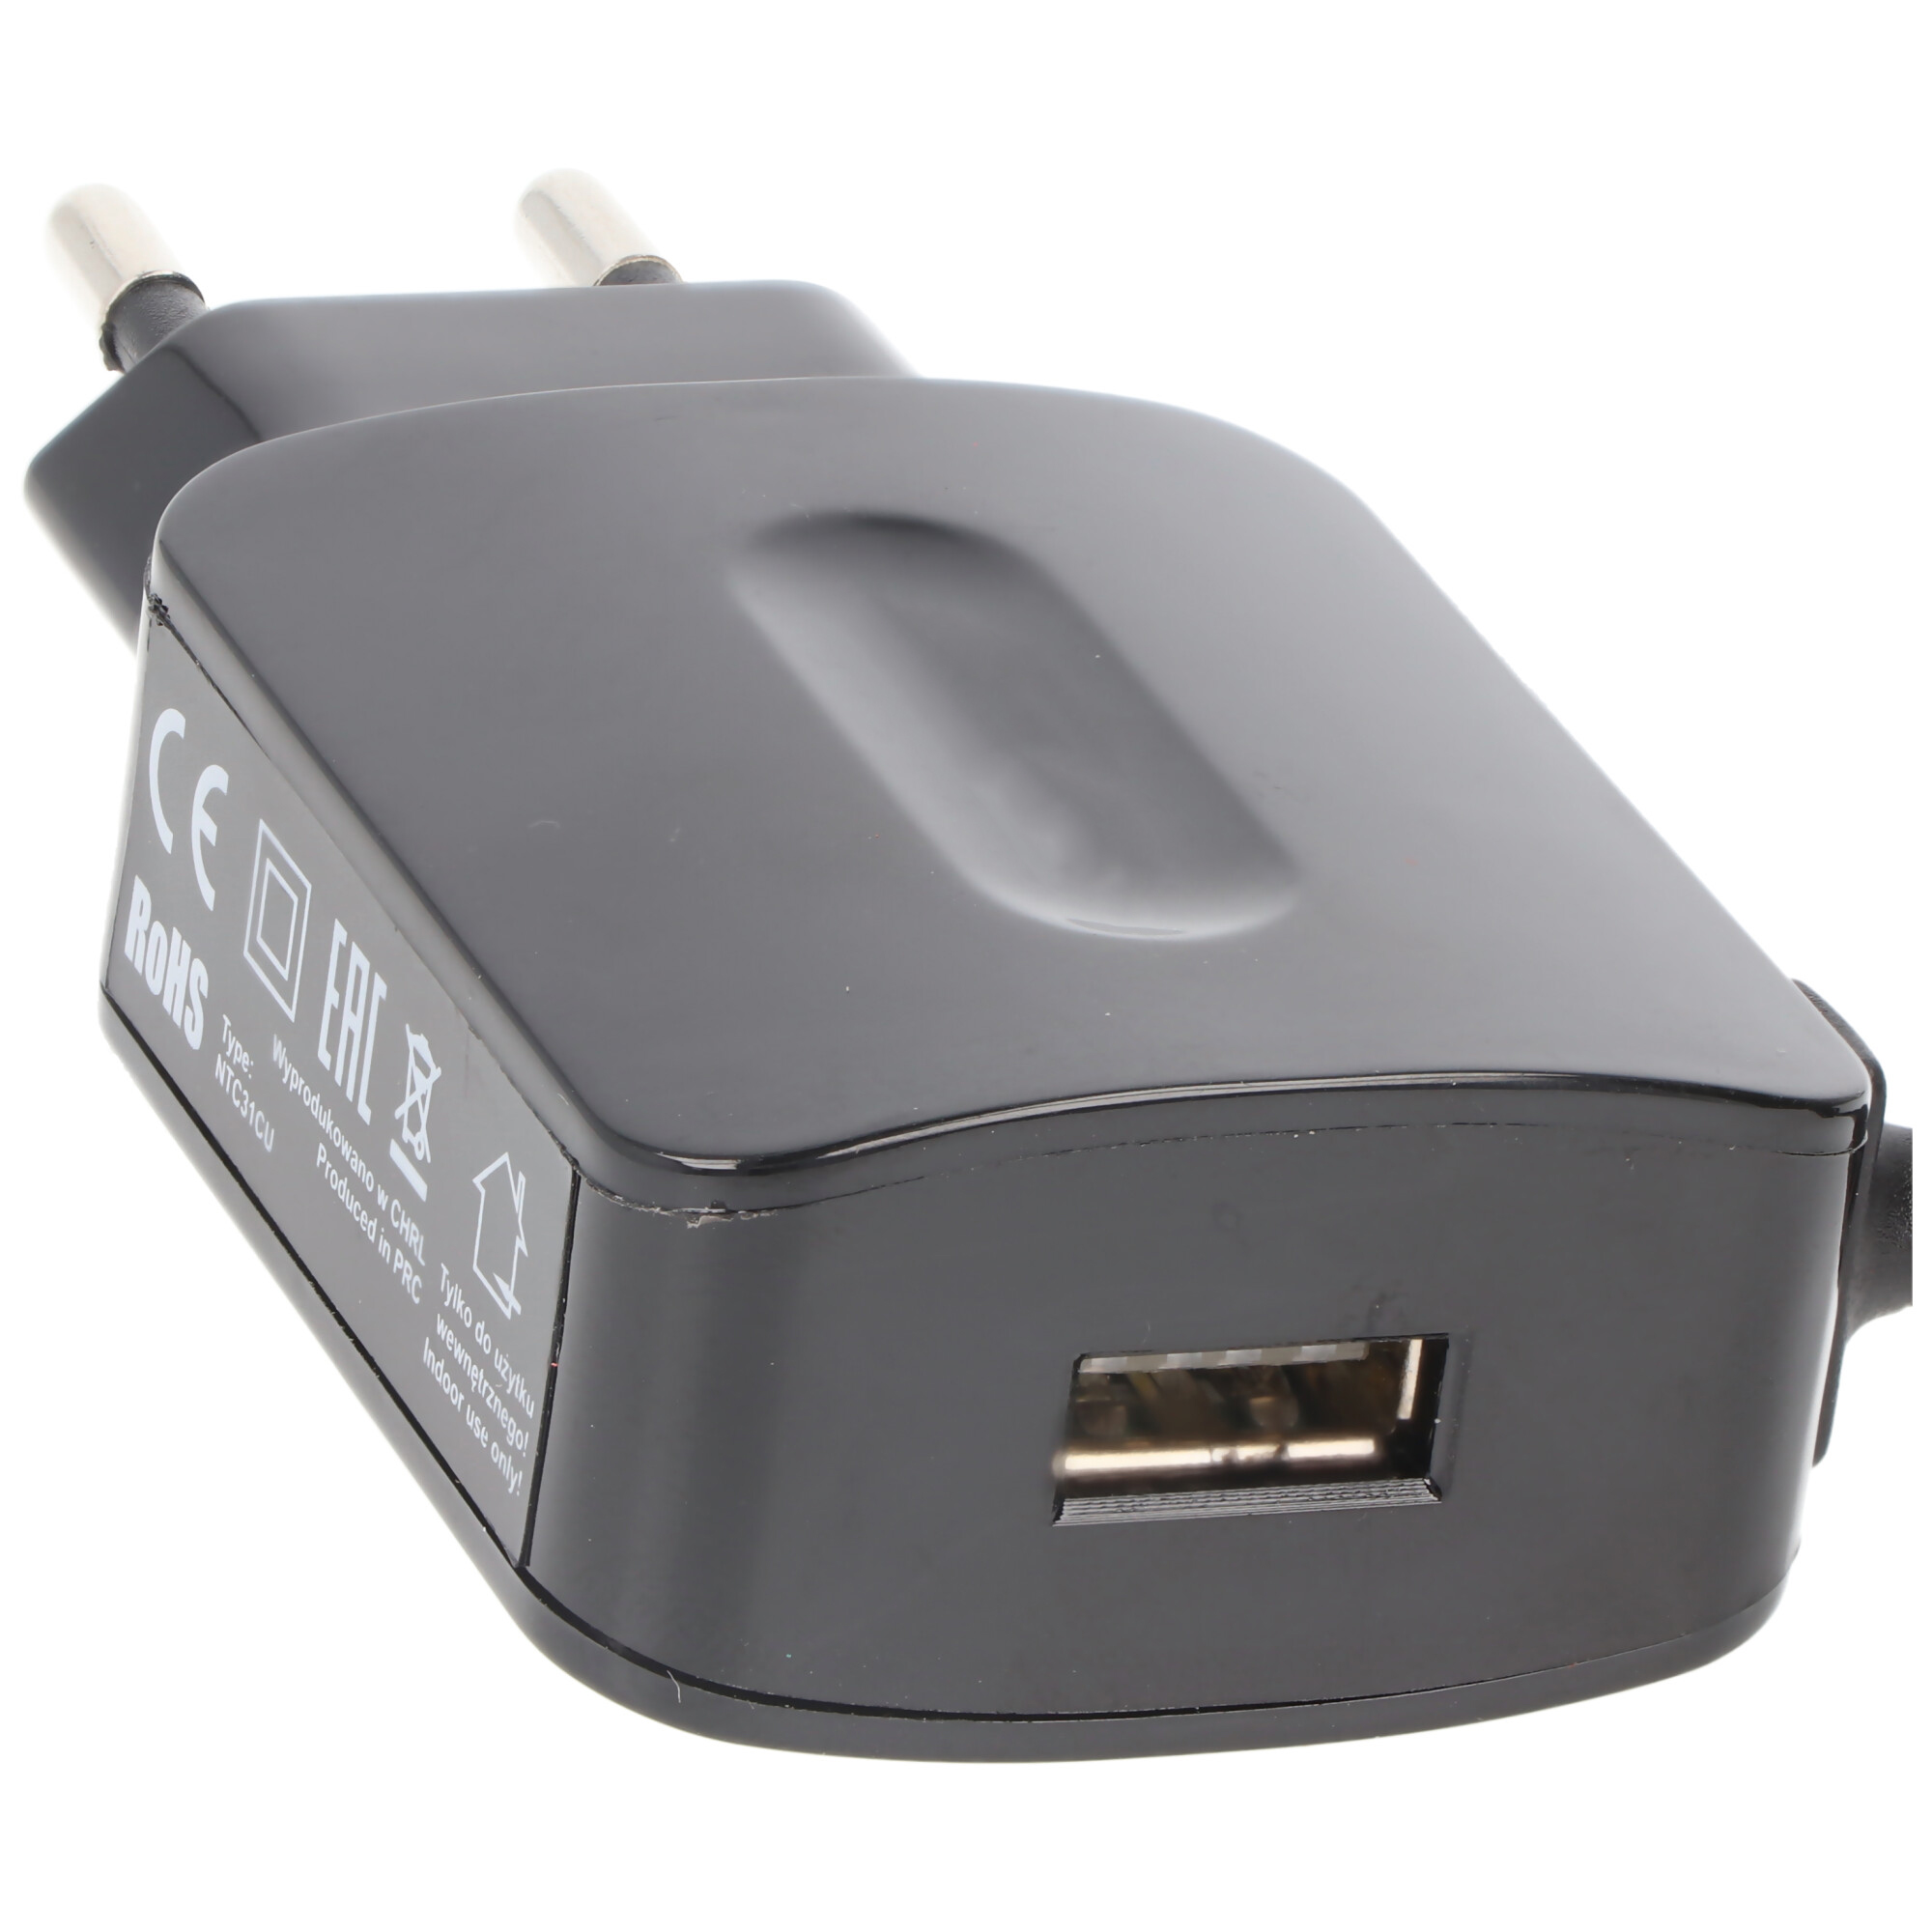 Ultra schnelles laden, USB-Netzteil QC 3.0 5V 3,1A Quick Charge max. 18W